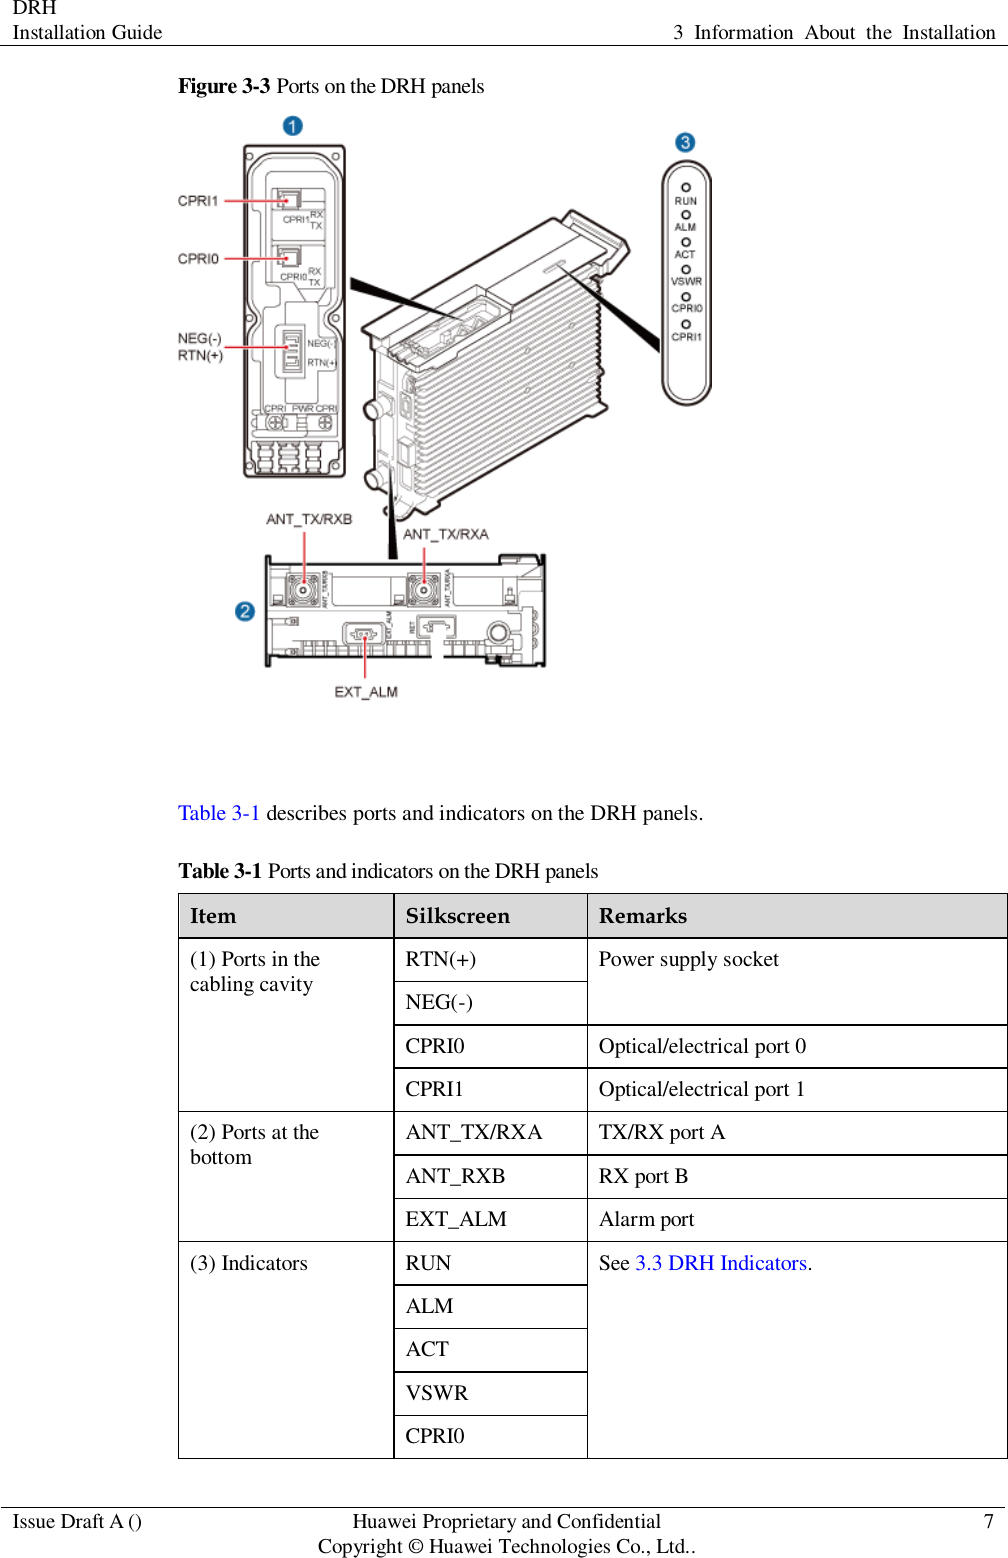 DRH   Installation Guide 3  Information  About  the  Installation  Issue Draft A () Huawei Proprietary and Confidential                                     Copyright © Huawei Technologies Co., Ltd.. 7  Figure 3-3 Ports on the DRH panels   Table 3-1 describes ports and indicators on the DRH panels. Table 3-1 Ports and indicators on the DRH panels Item Silkscreen Remarks (1) Ports in the cabling cavity RTN(+) Power supply socket NEG(-) CPRI0 Optical/electrical port 0 CPRI1 Optical/electrical port 1 (2) Ports at the bottom ANT_TX/RXA TX/RX port A ANT_RXB RX port B EXT_ALM Alarm port (3) Indicators RUN See 3.3 DRH Indicators. ALM ACT VSWR CPRI0 